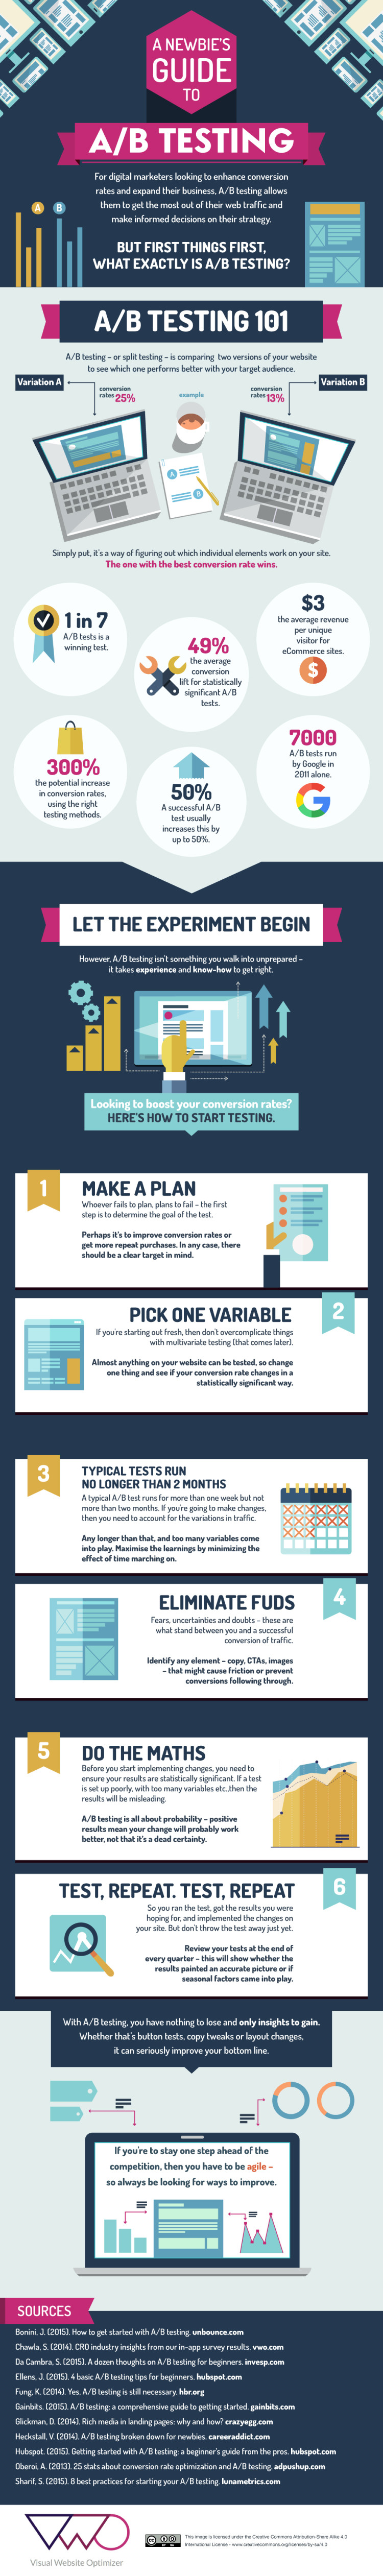 A Newbies Guide to AB Testing